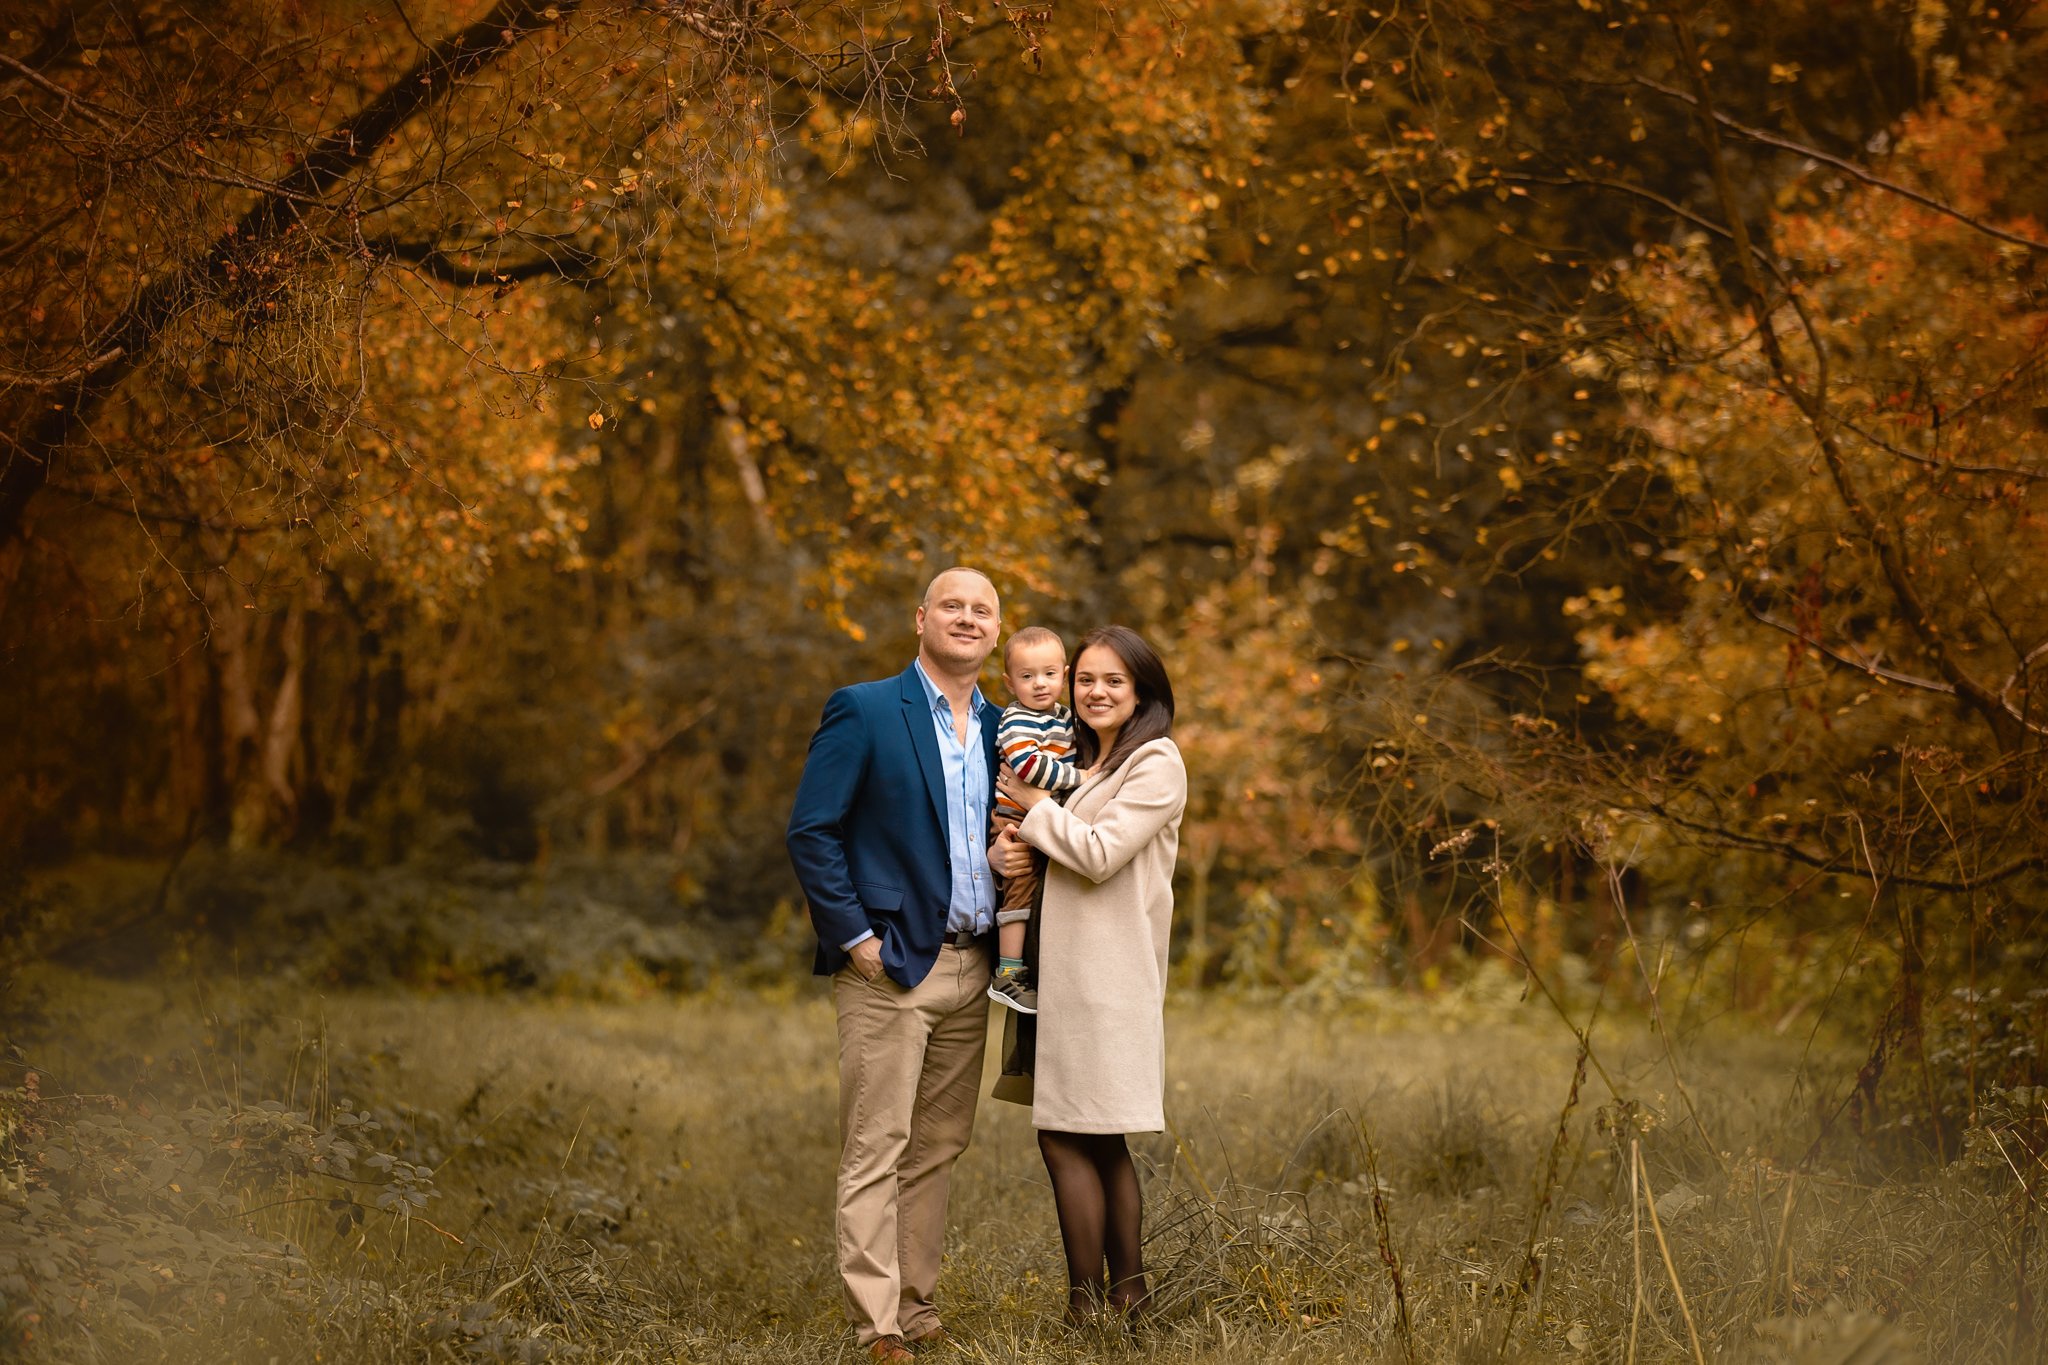 Autumn Mini Sessions in Leeds, Yorkshire